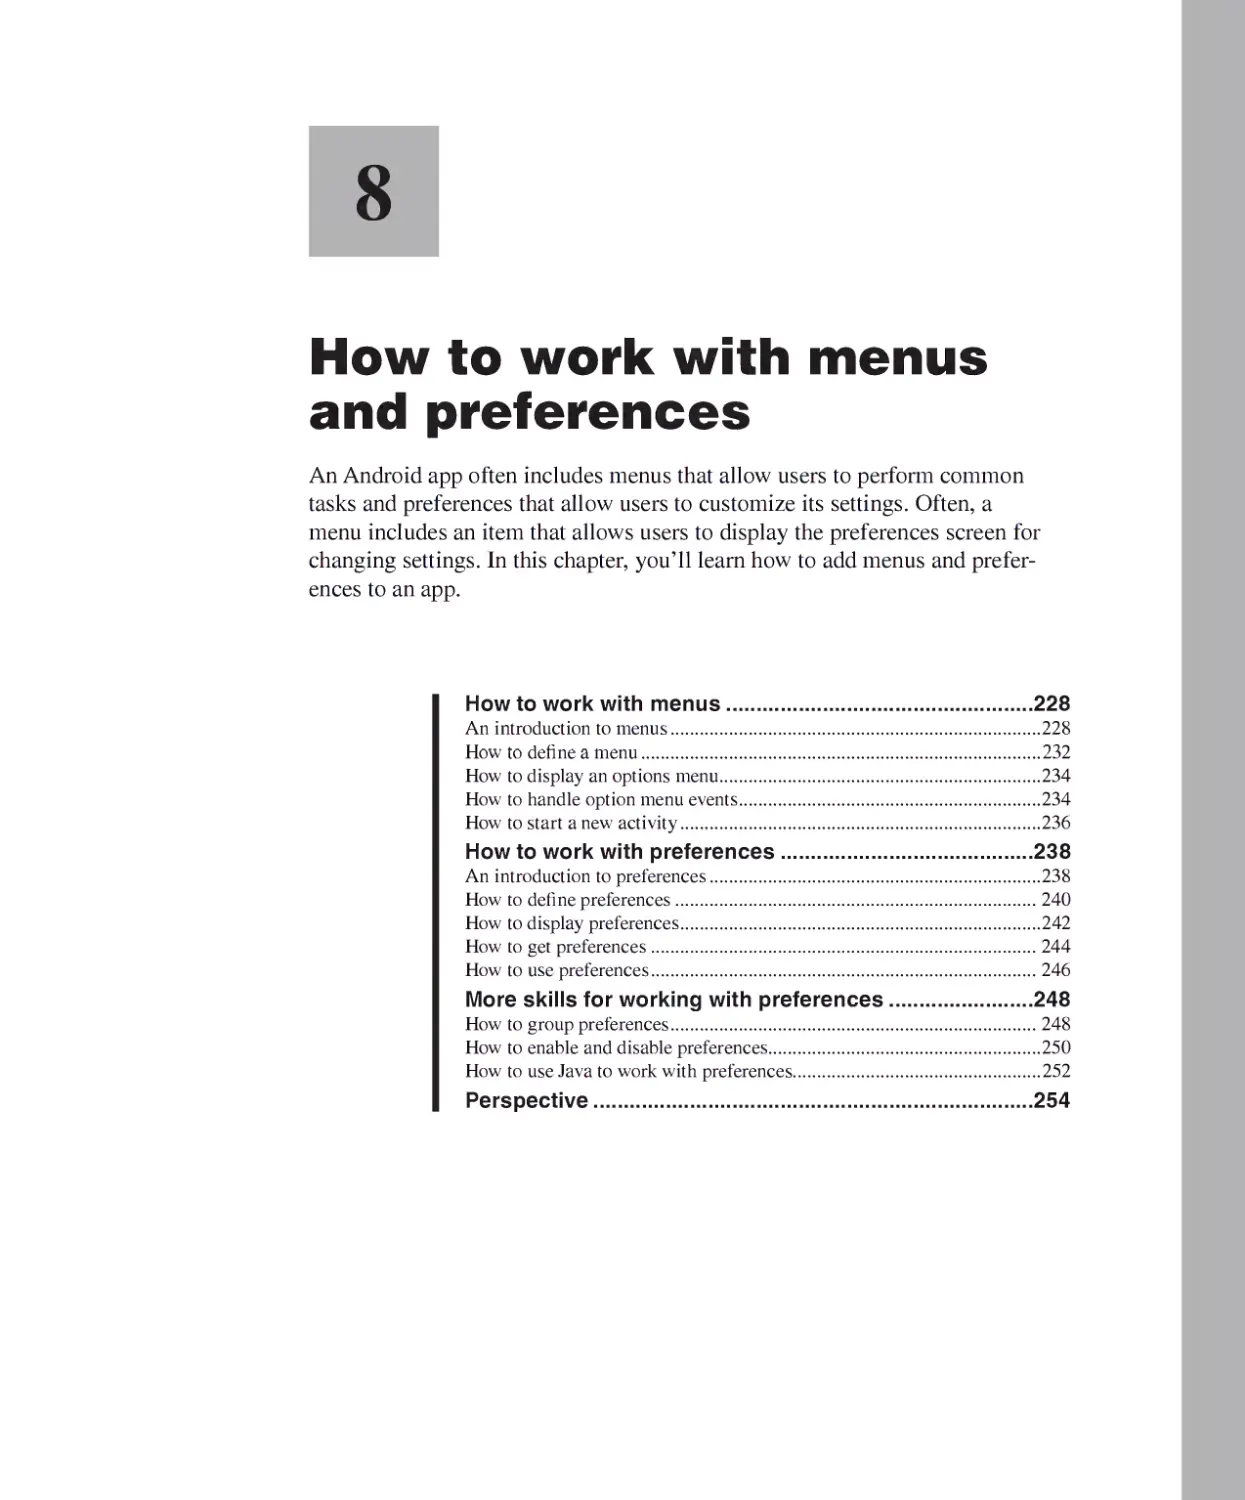 Chapter 8 - How to Work with Menus and Preferences